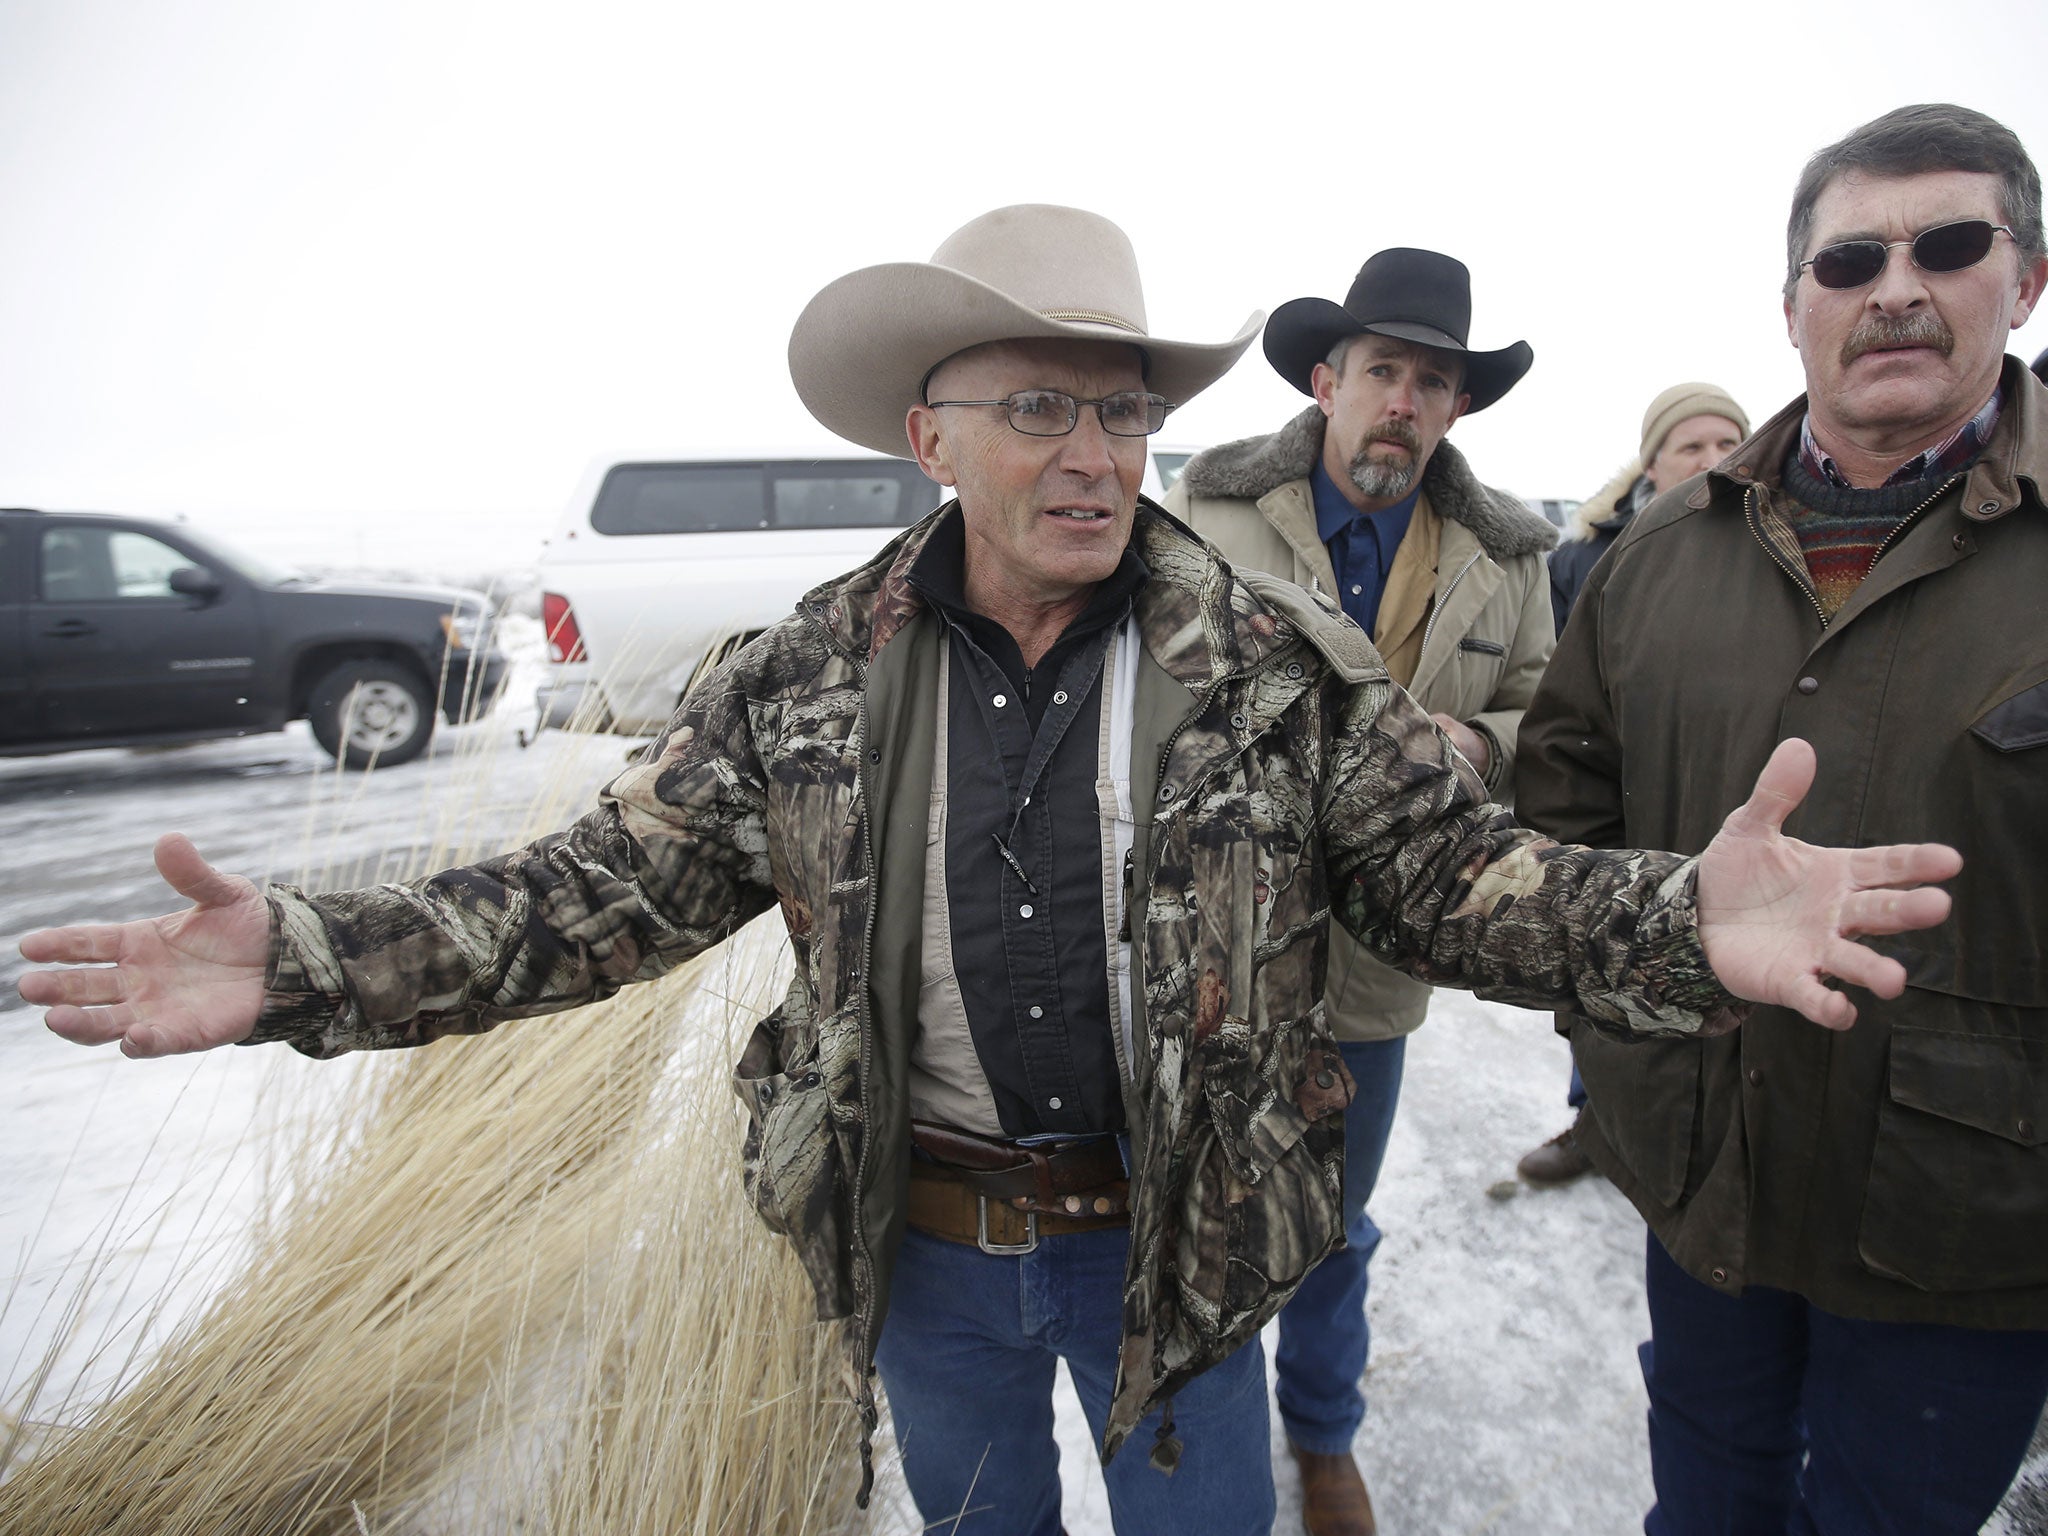 LaVoy Finnicum's family confirmed he was killed in the standoff